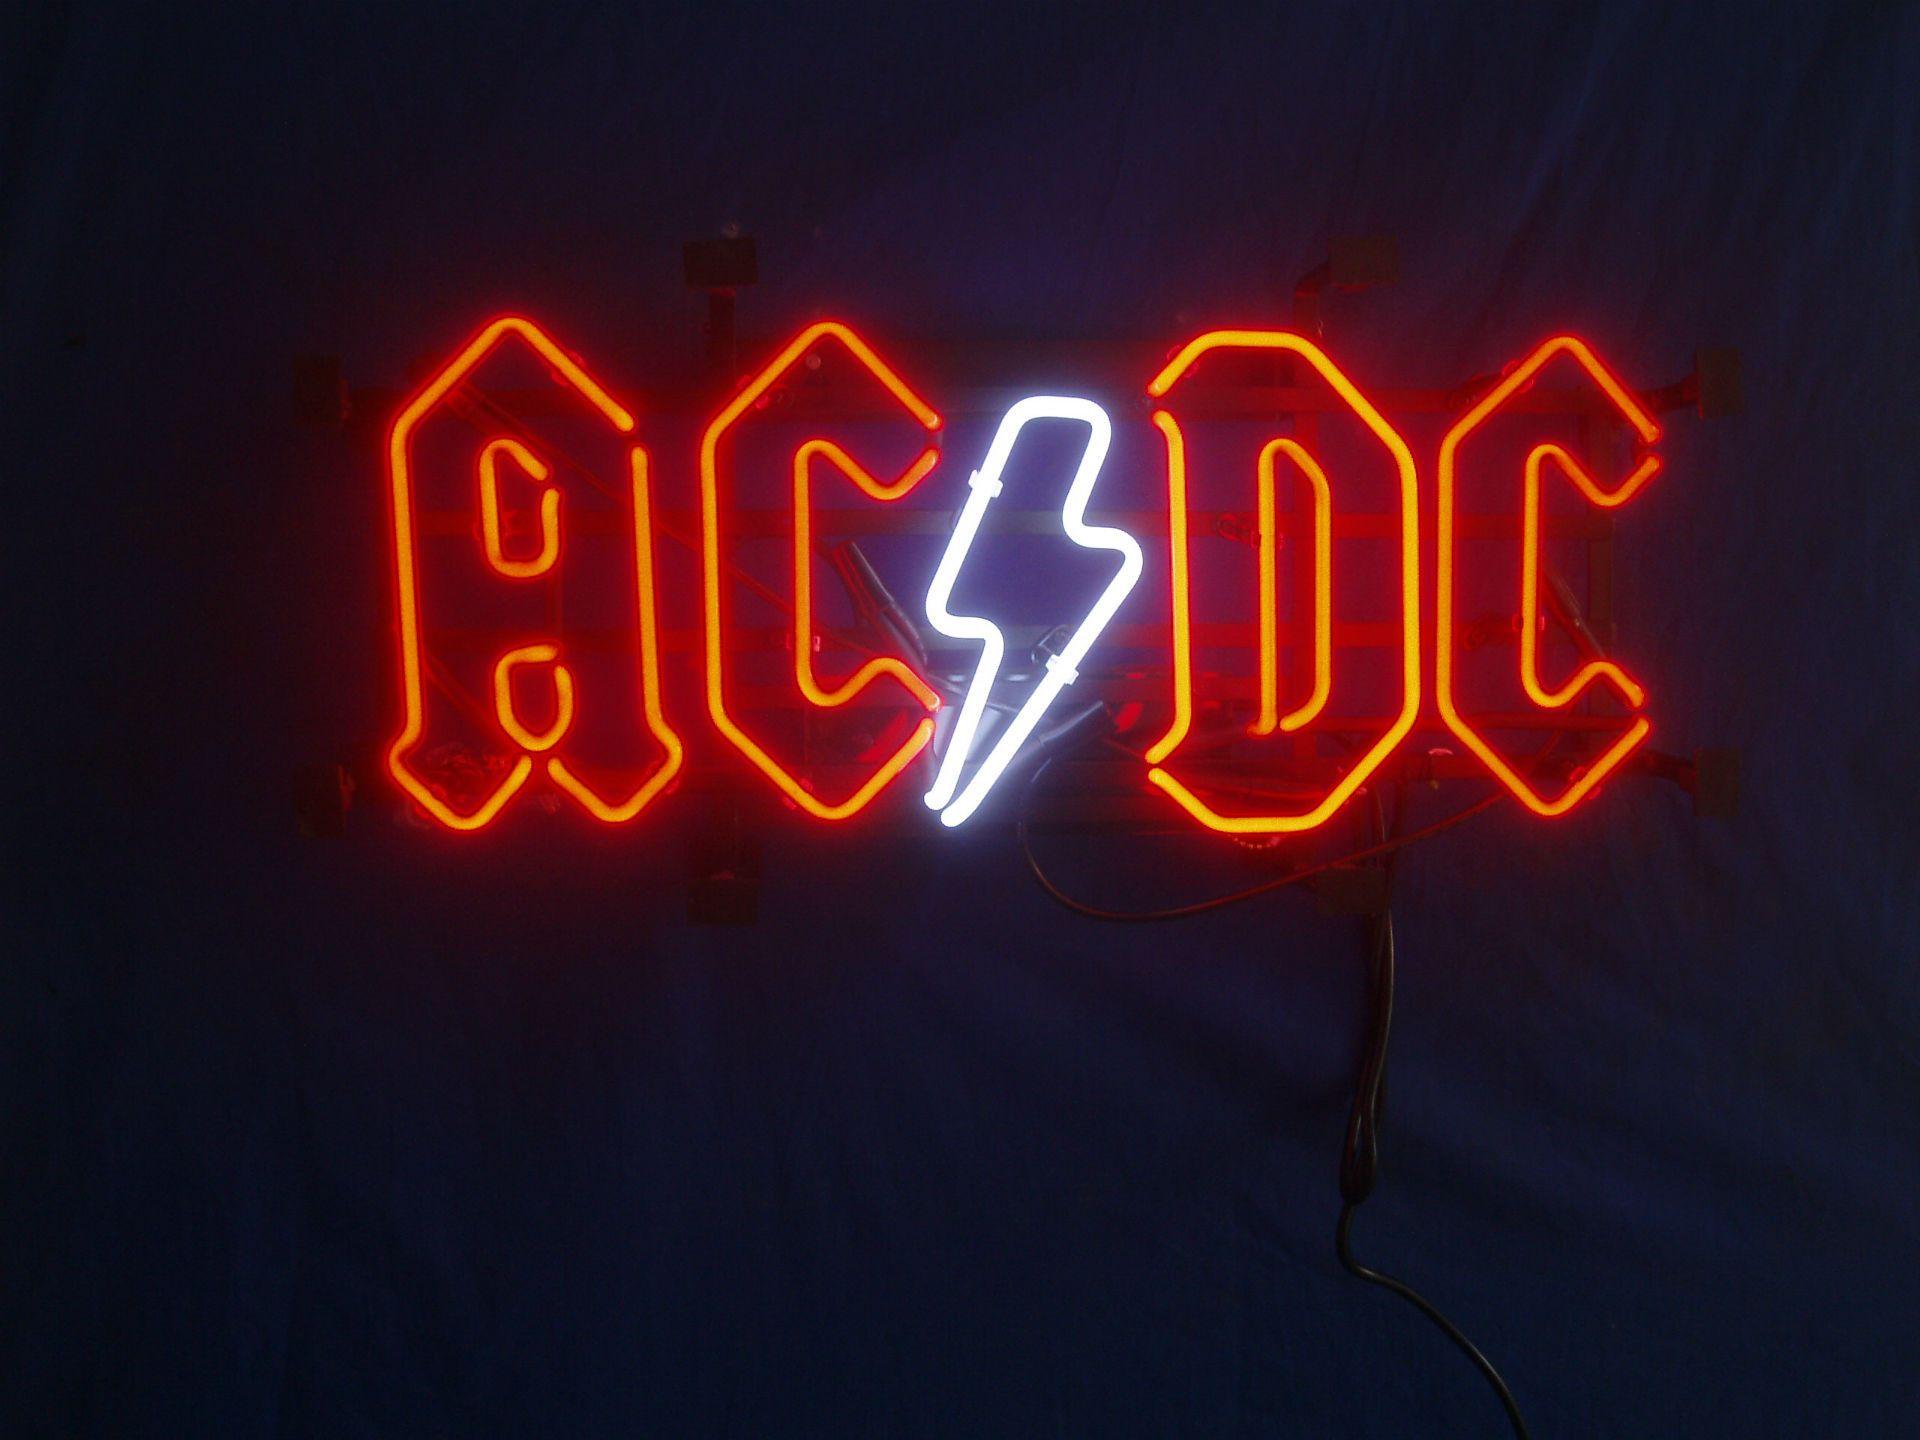 AC DC Full HD Wallpaper And Background Imagex1440